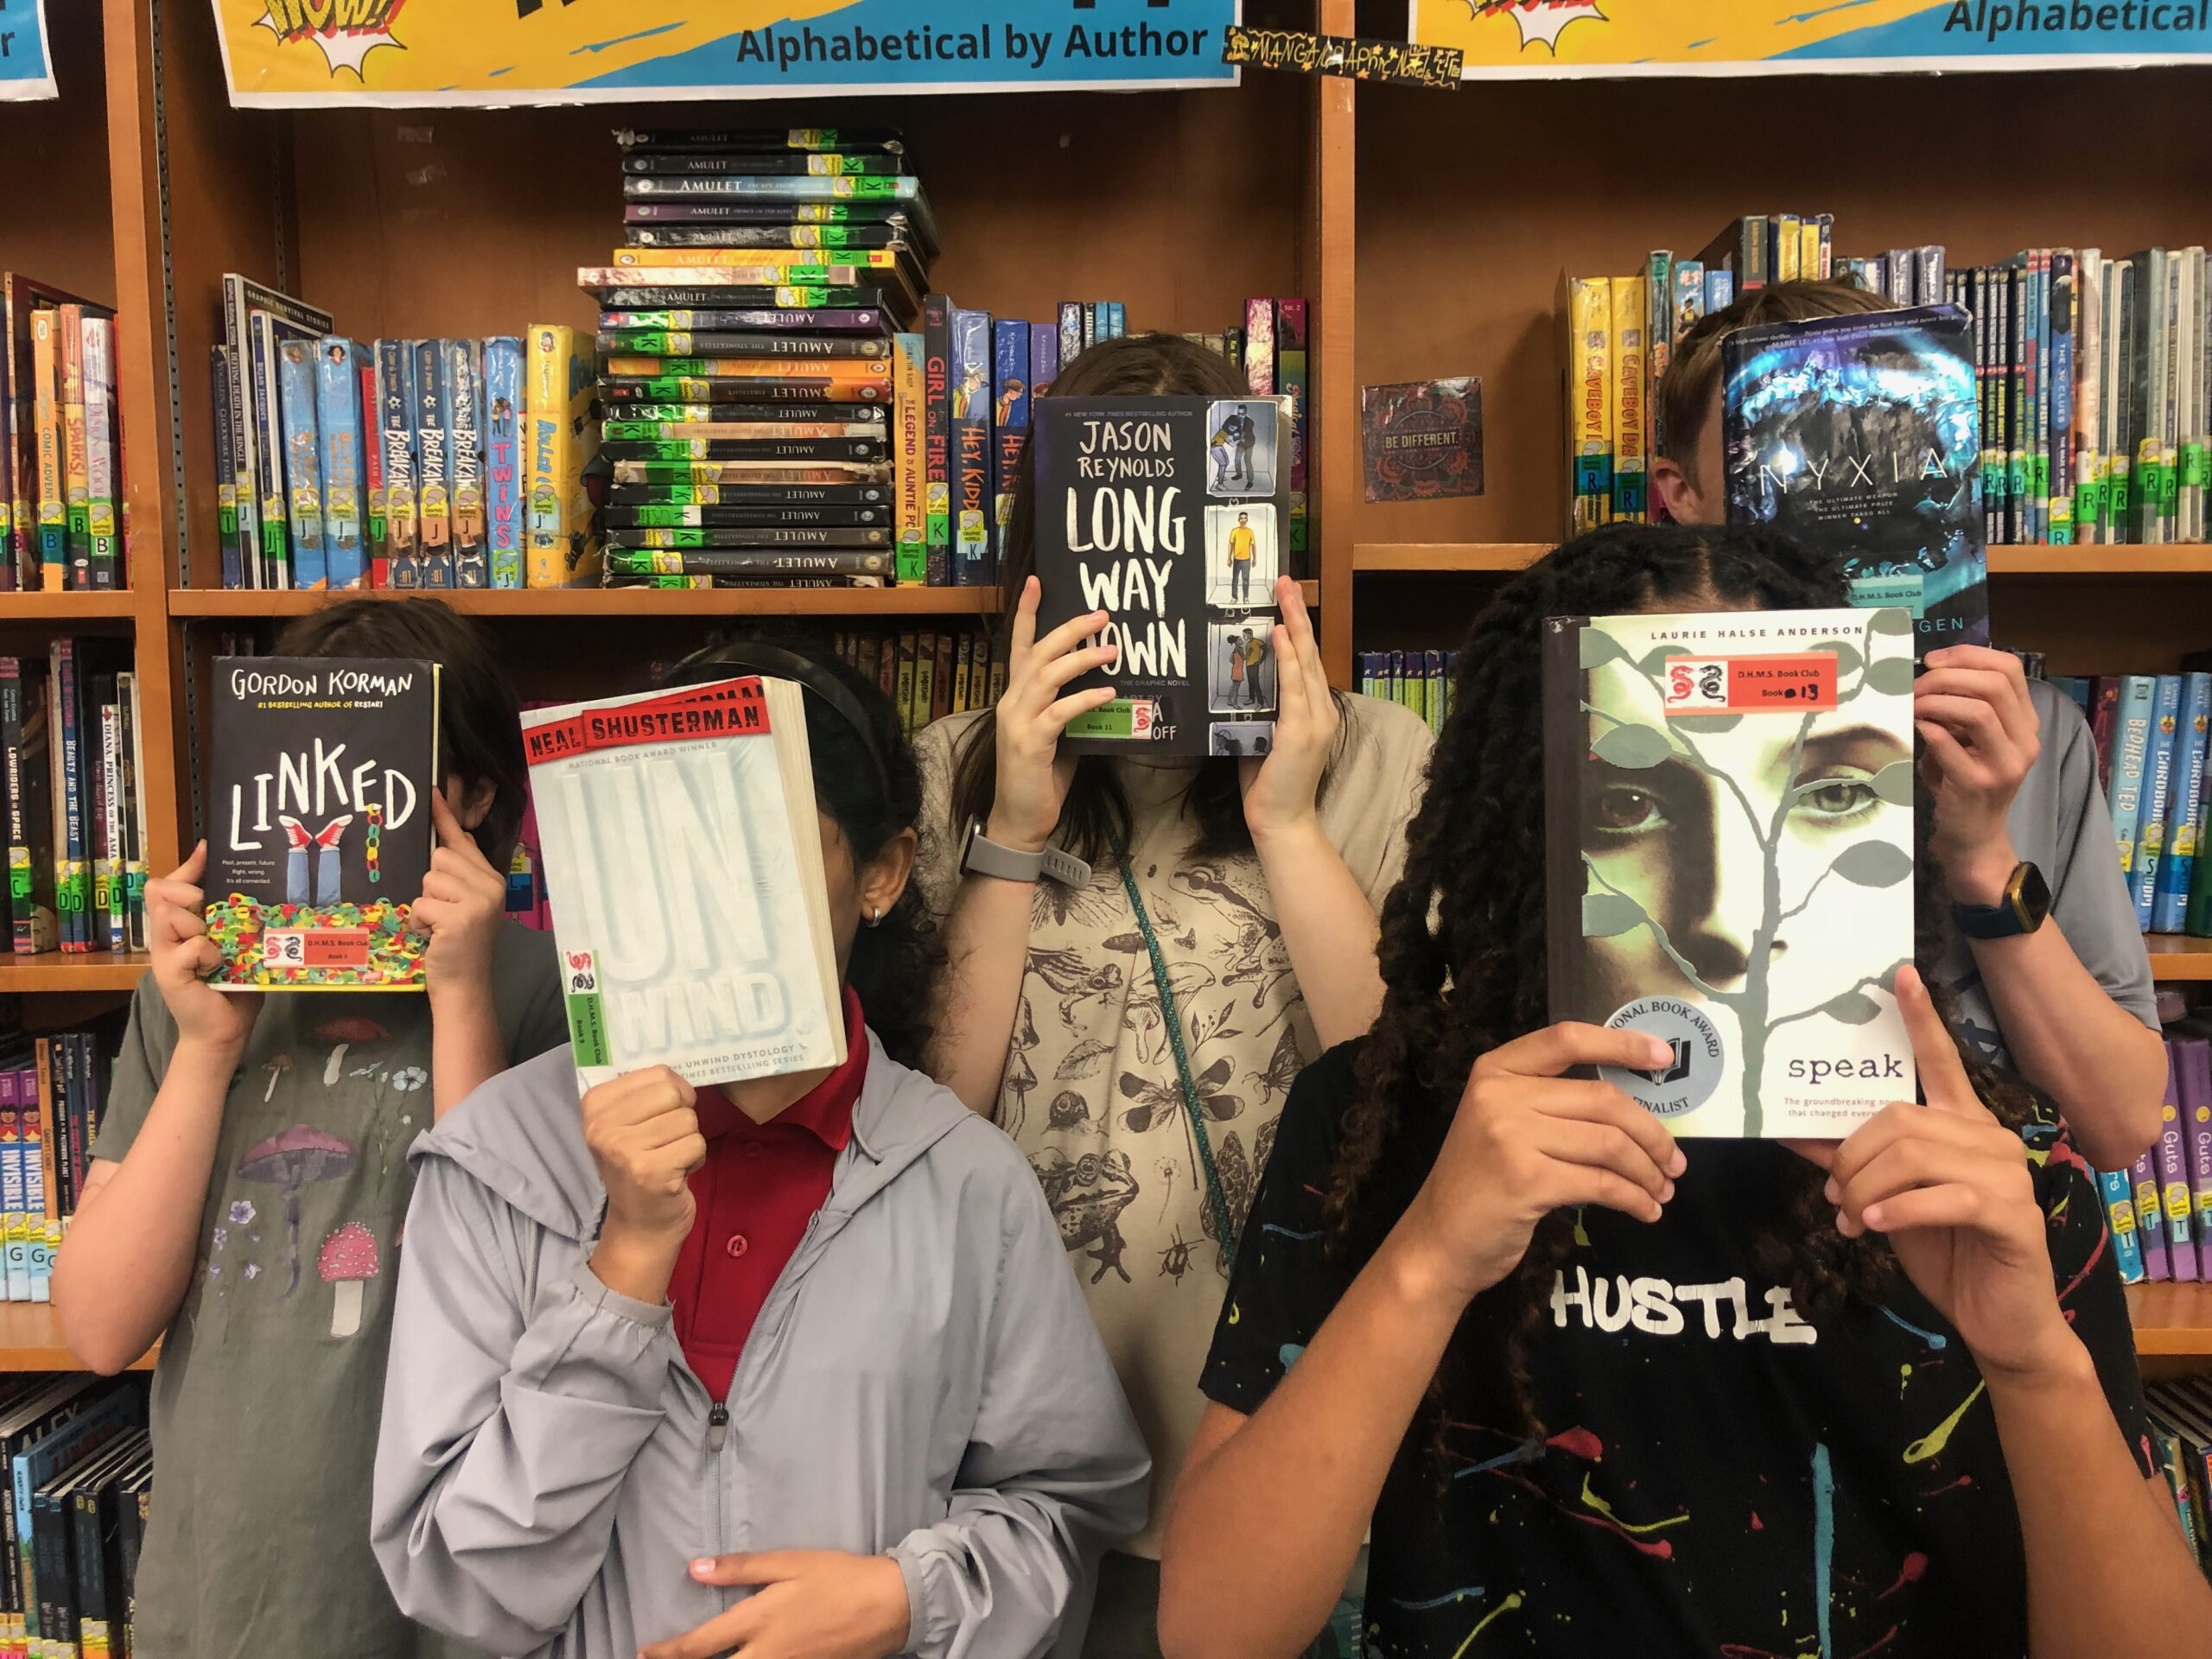 A Manifesto in Support of Middle School Books, a guest post by Marcia Kochel